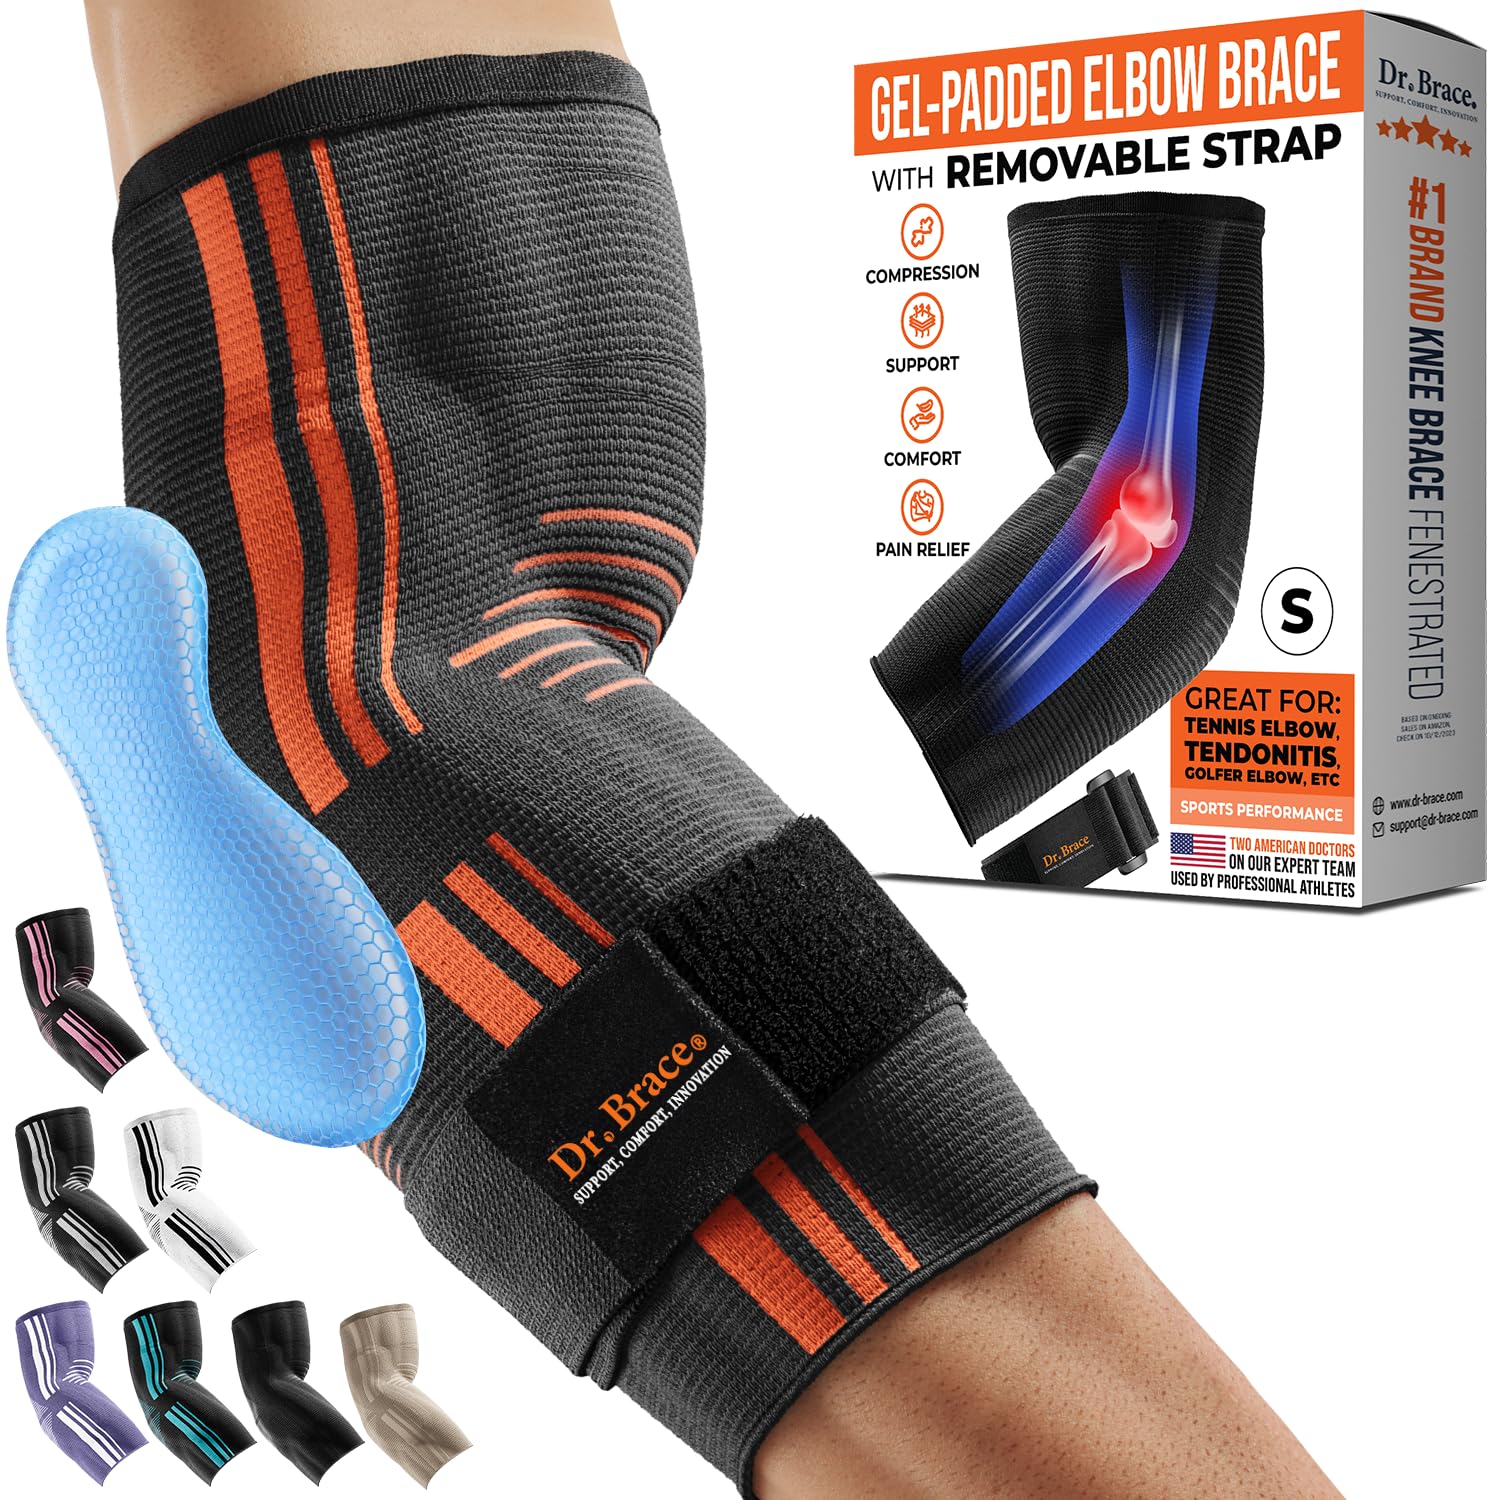 DR. BRACE® ELITE Elbow Brace support, Breathable Elbow Compression Sleeve with Gel Pad for Golfers, Tennis Elbow  Tendonitis Treatment  Pain Relief - With Removable Arm Wrap for Daily Wear / Weightlifting / Sport (Black, Medium)